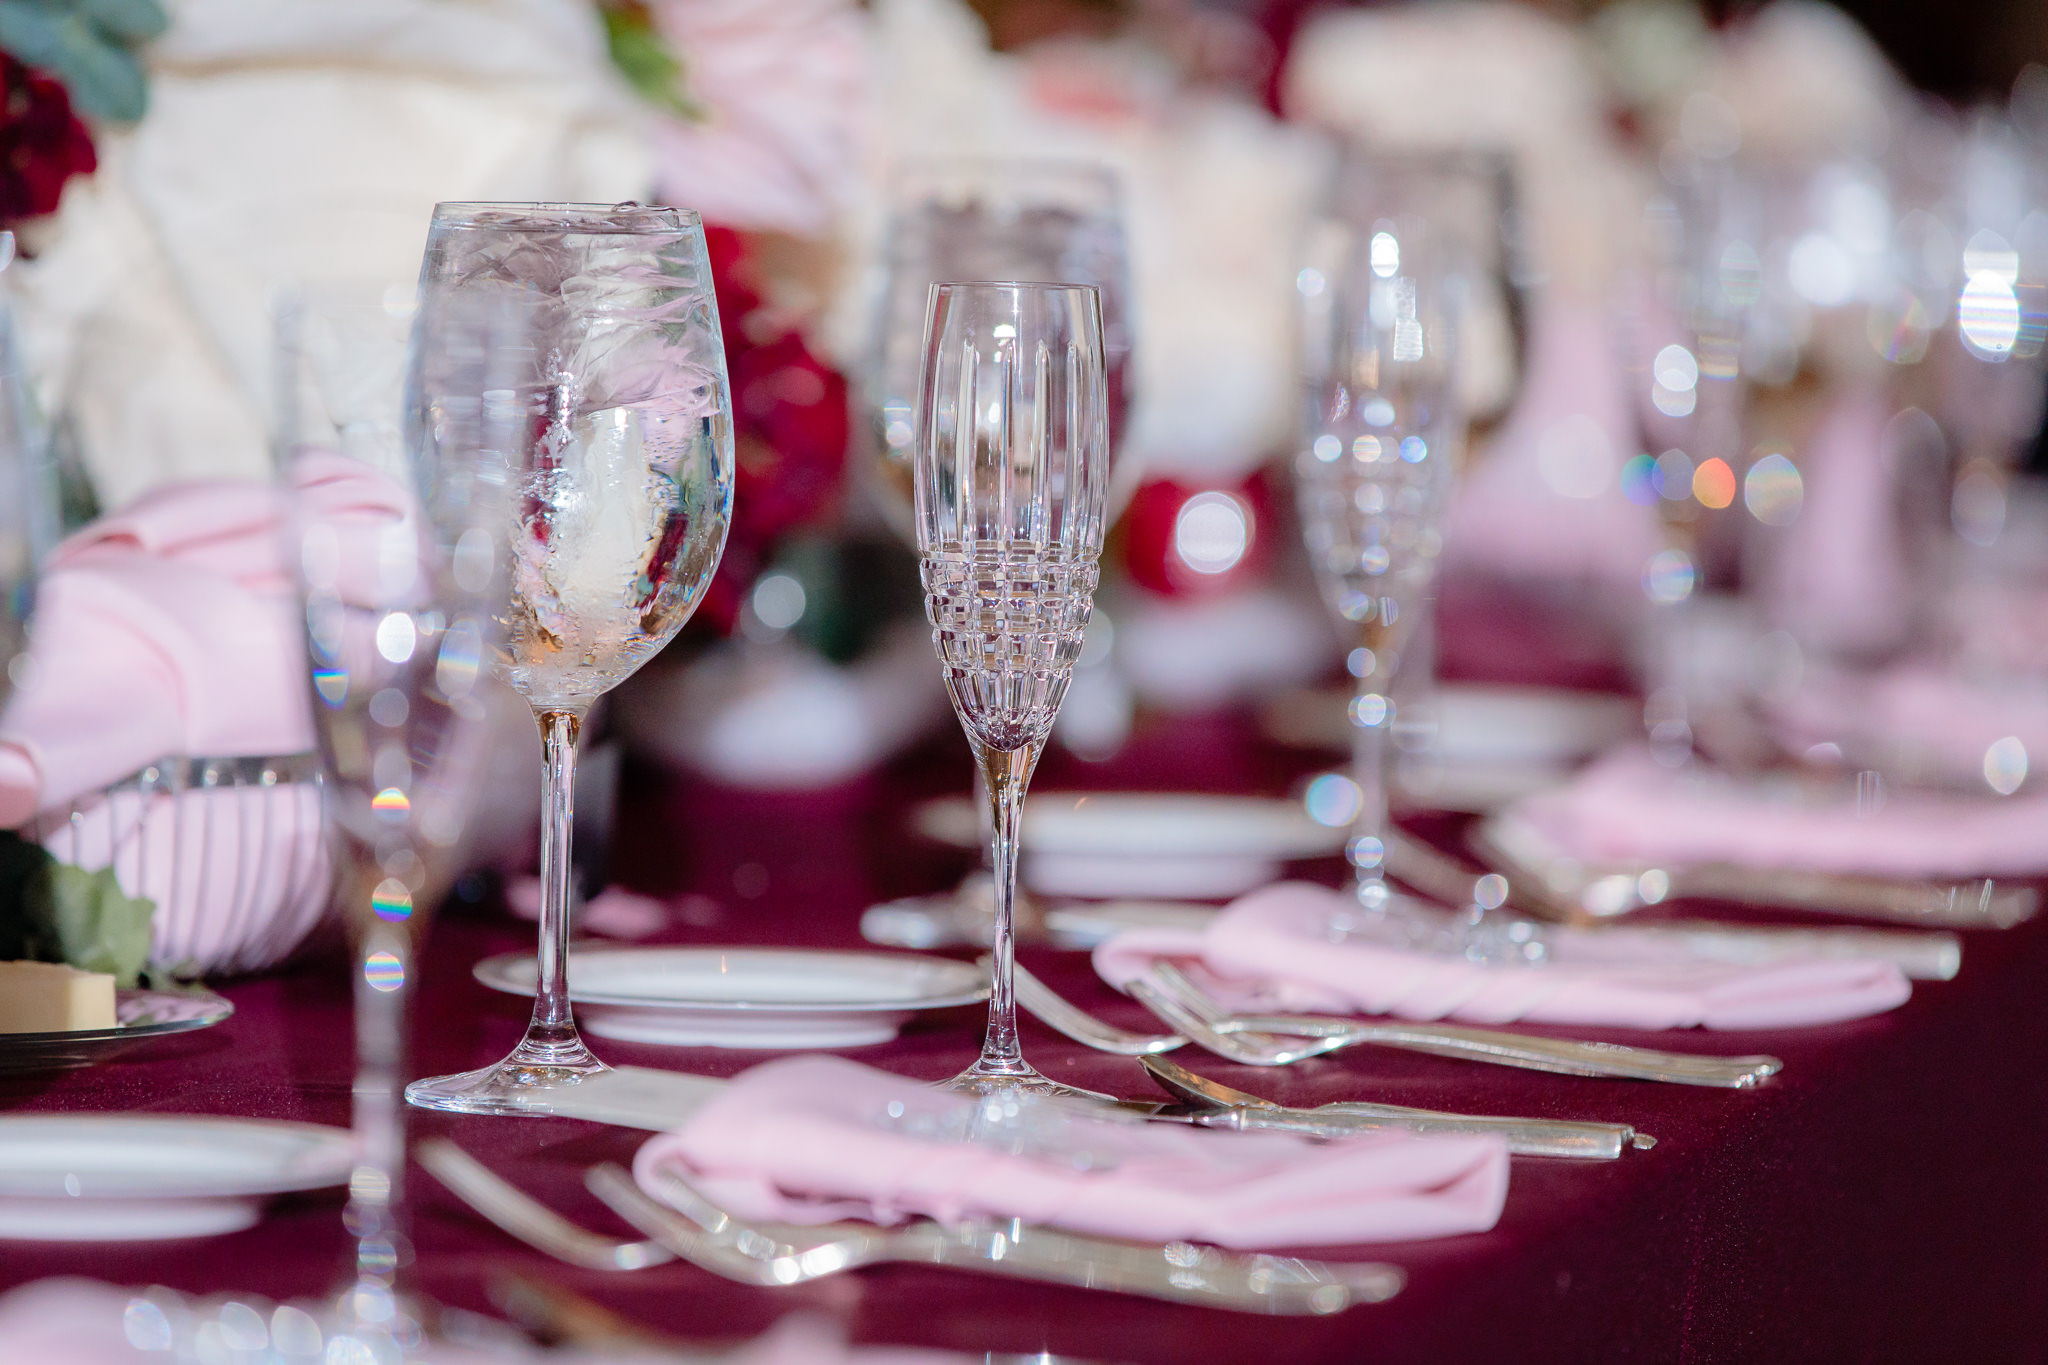 Champagne flutes with decorative glass at a Pennsylvanian wedding reception